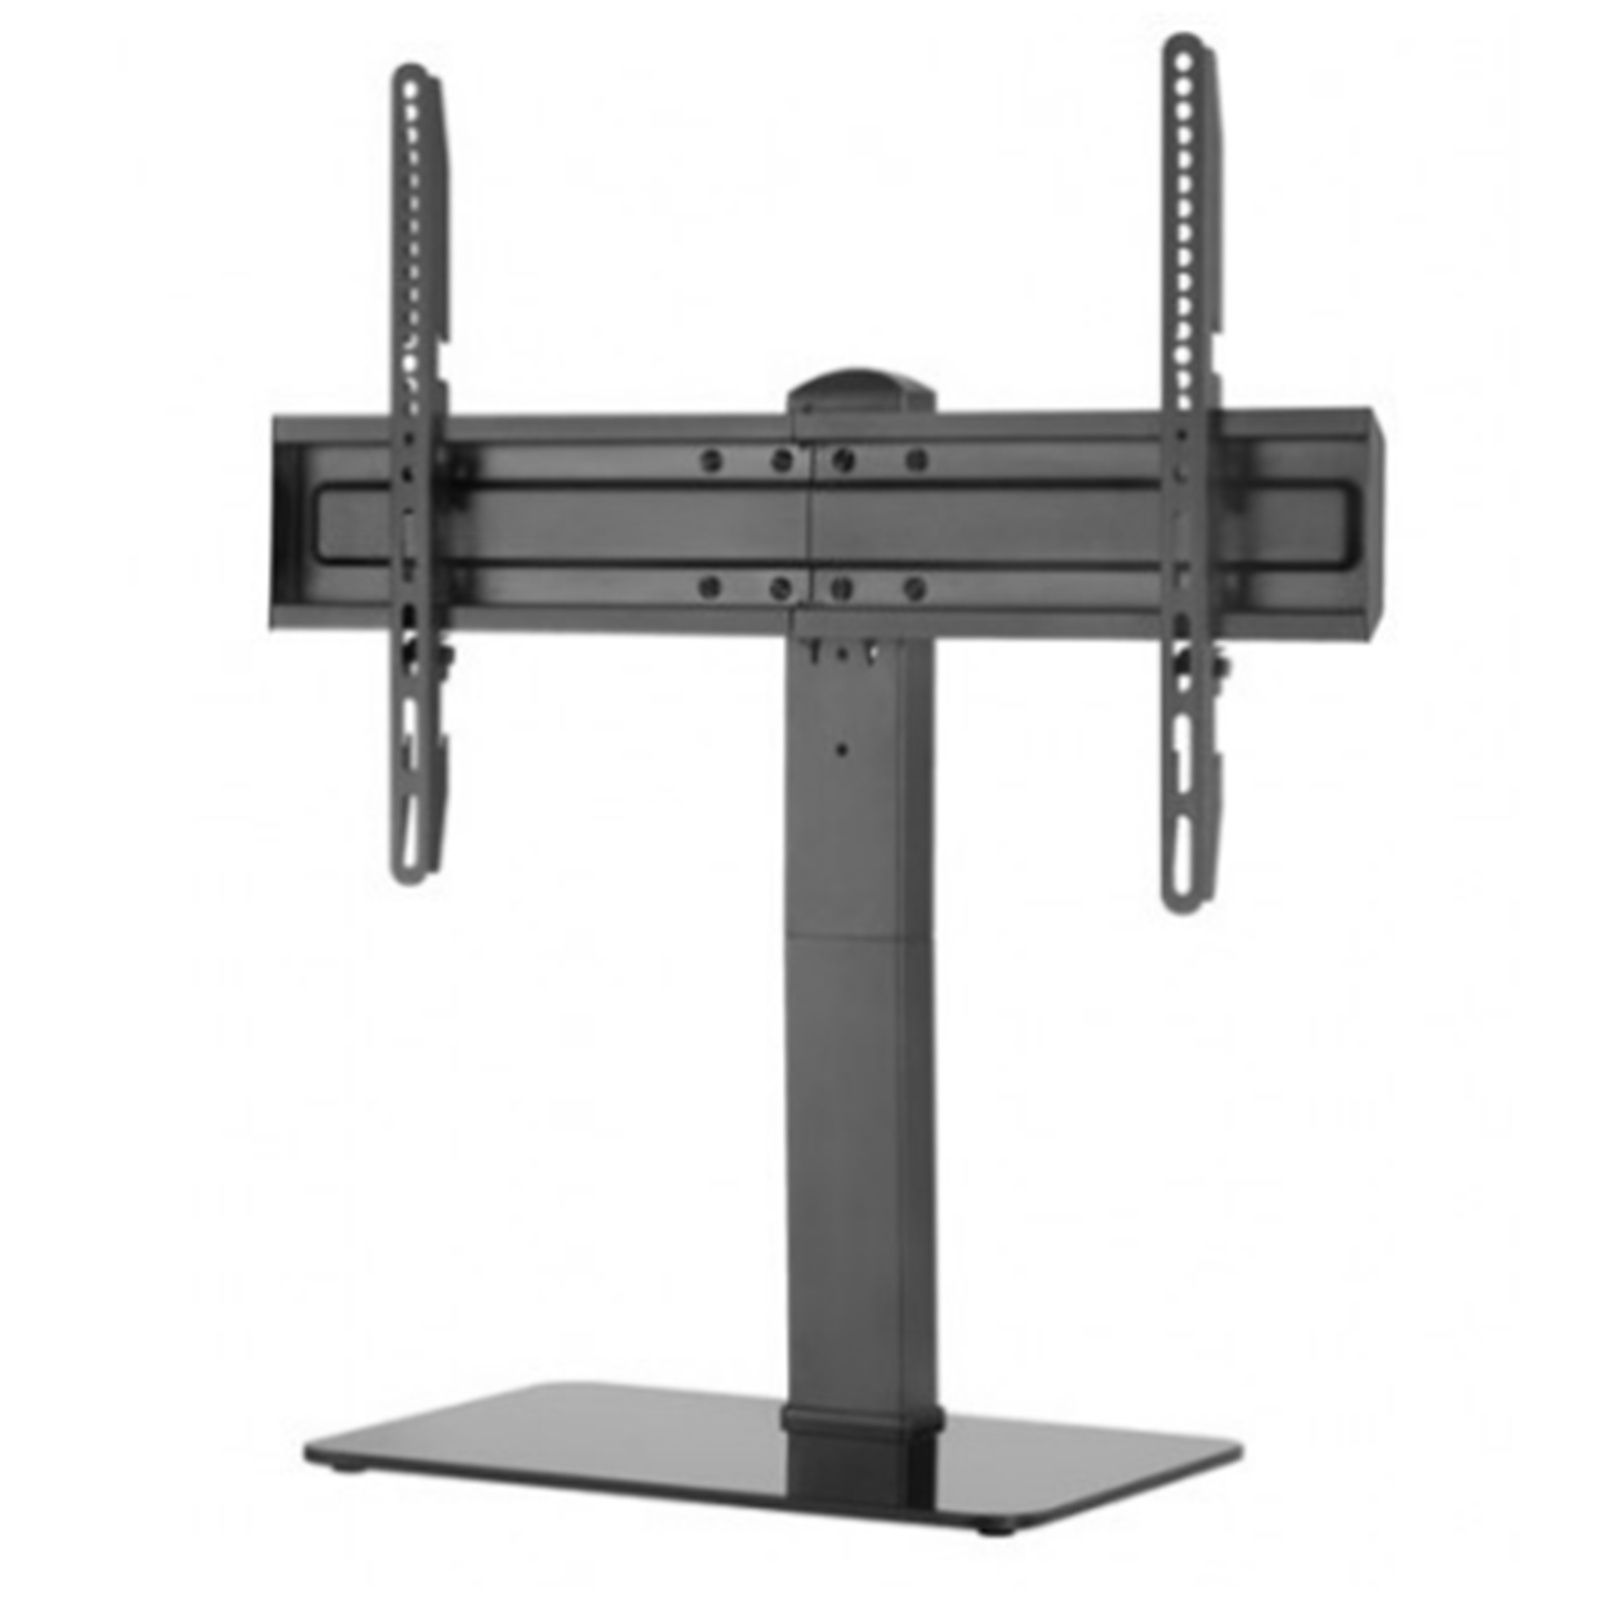 Buy The Omp M7446 Universal Tabletop Tv Stand Large 37 70 Vesa 400 ( M7446  ) Online – Pbtech.co (View 2 of 15)